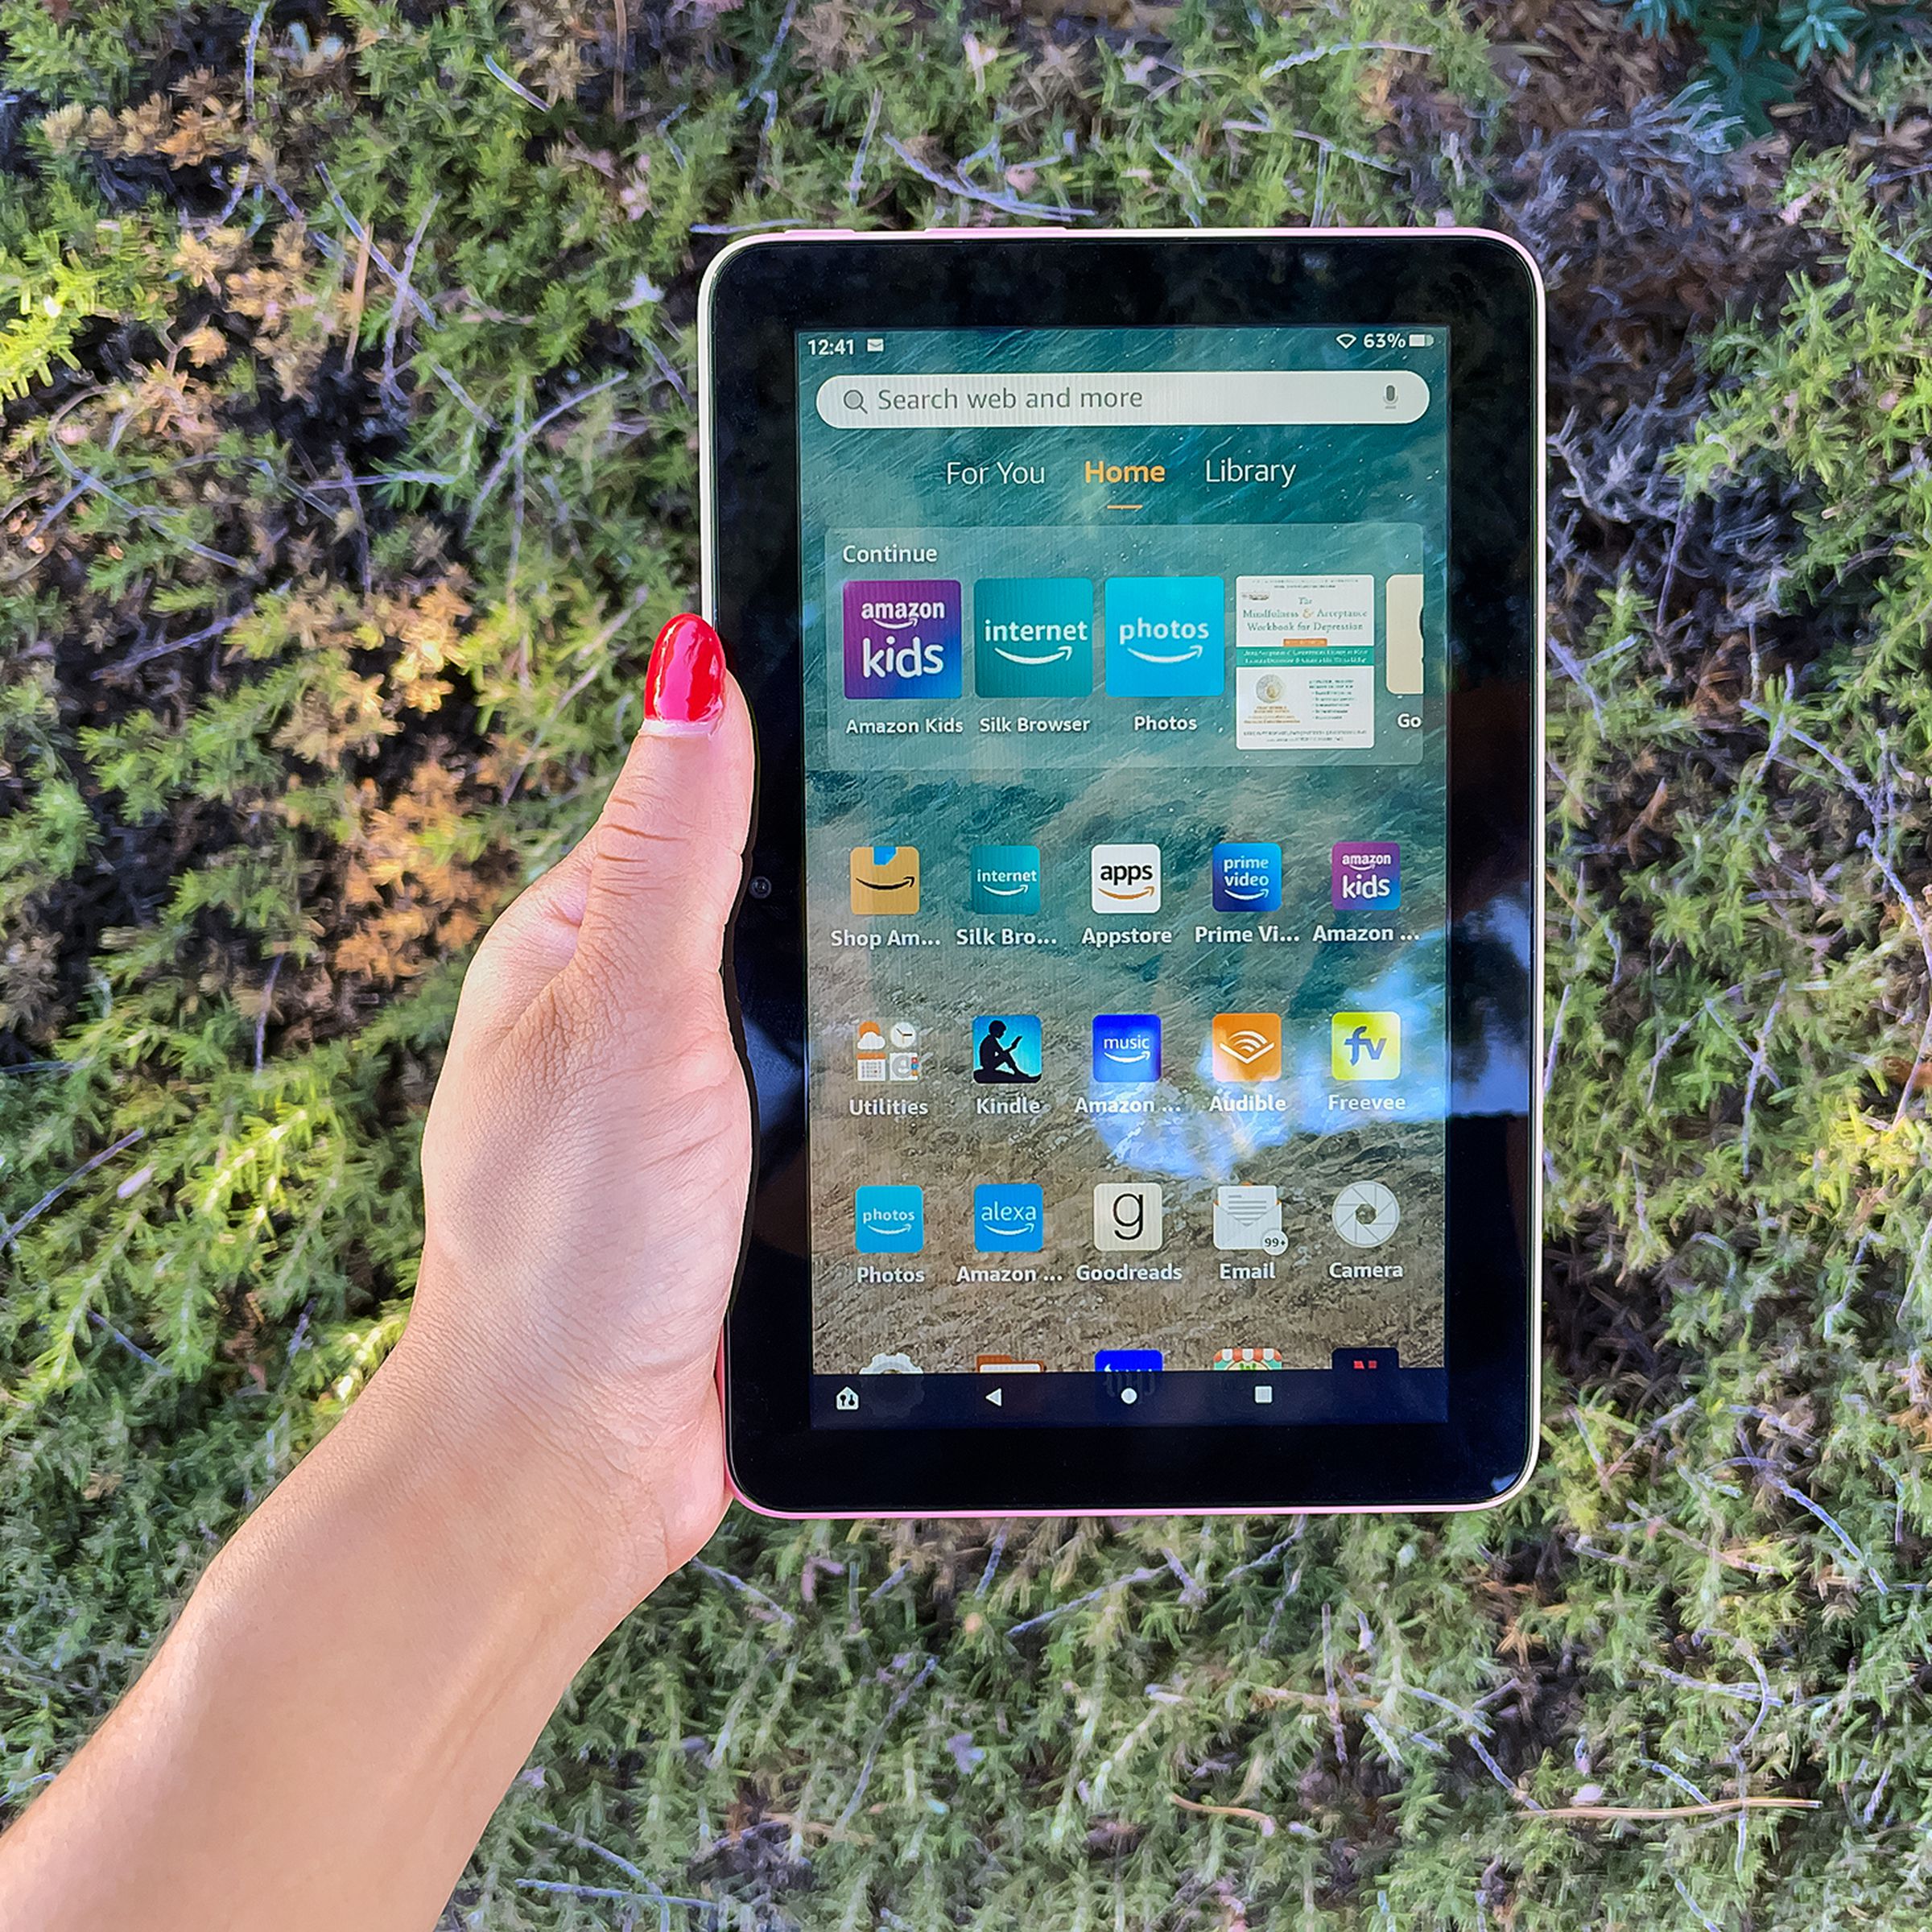 A hand holding Amazon’s Fire 7 tablet while its screen is turned on.